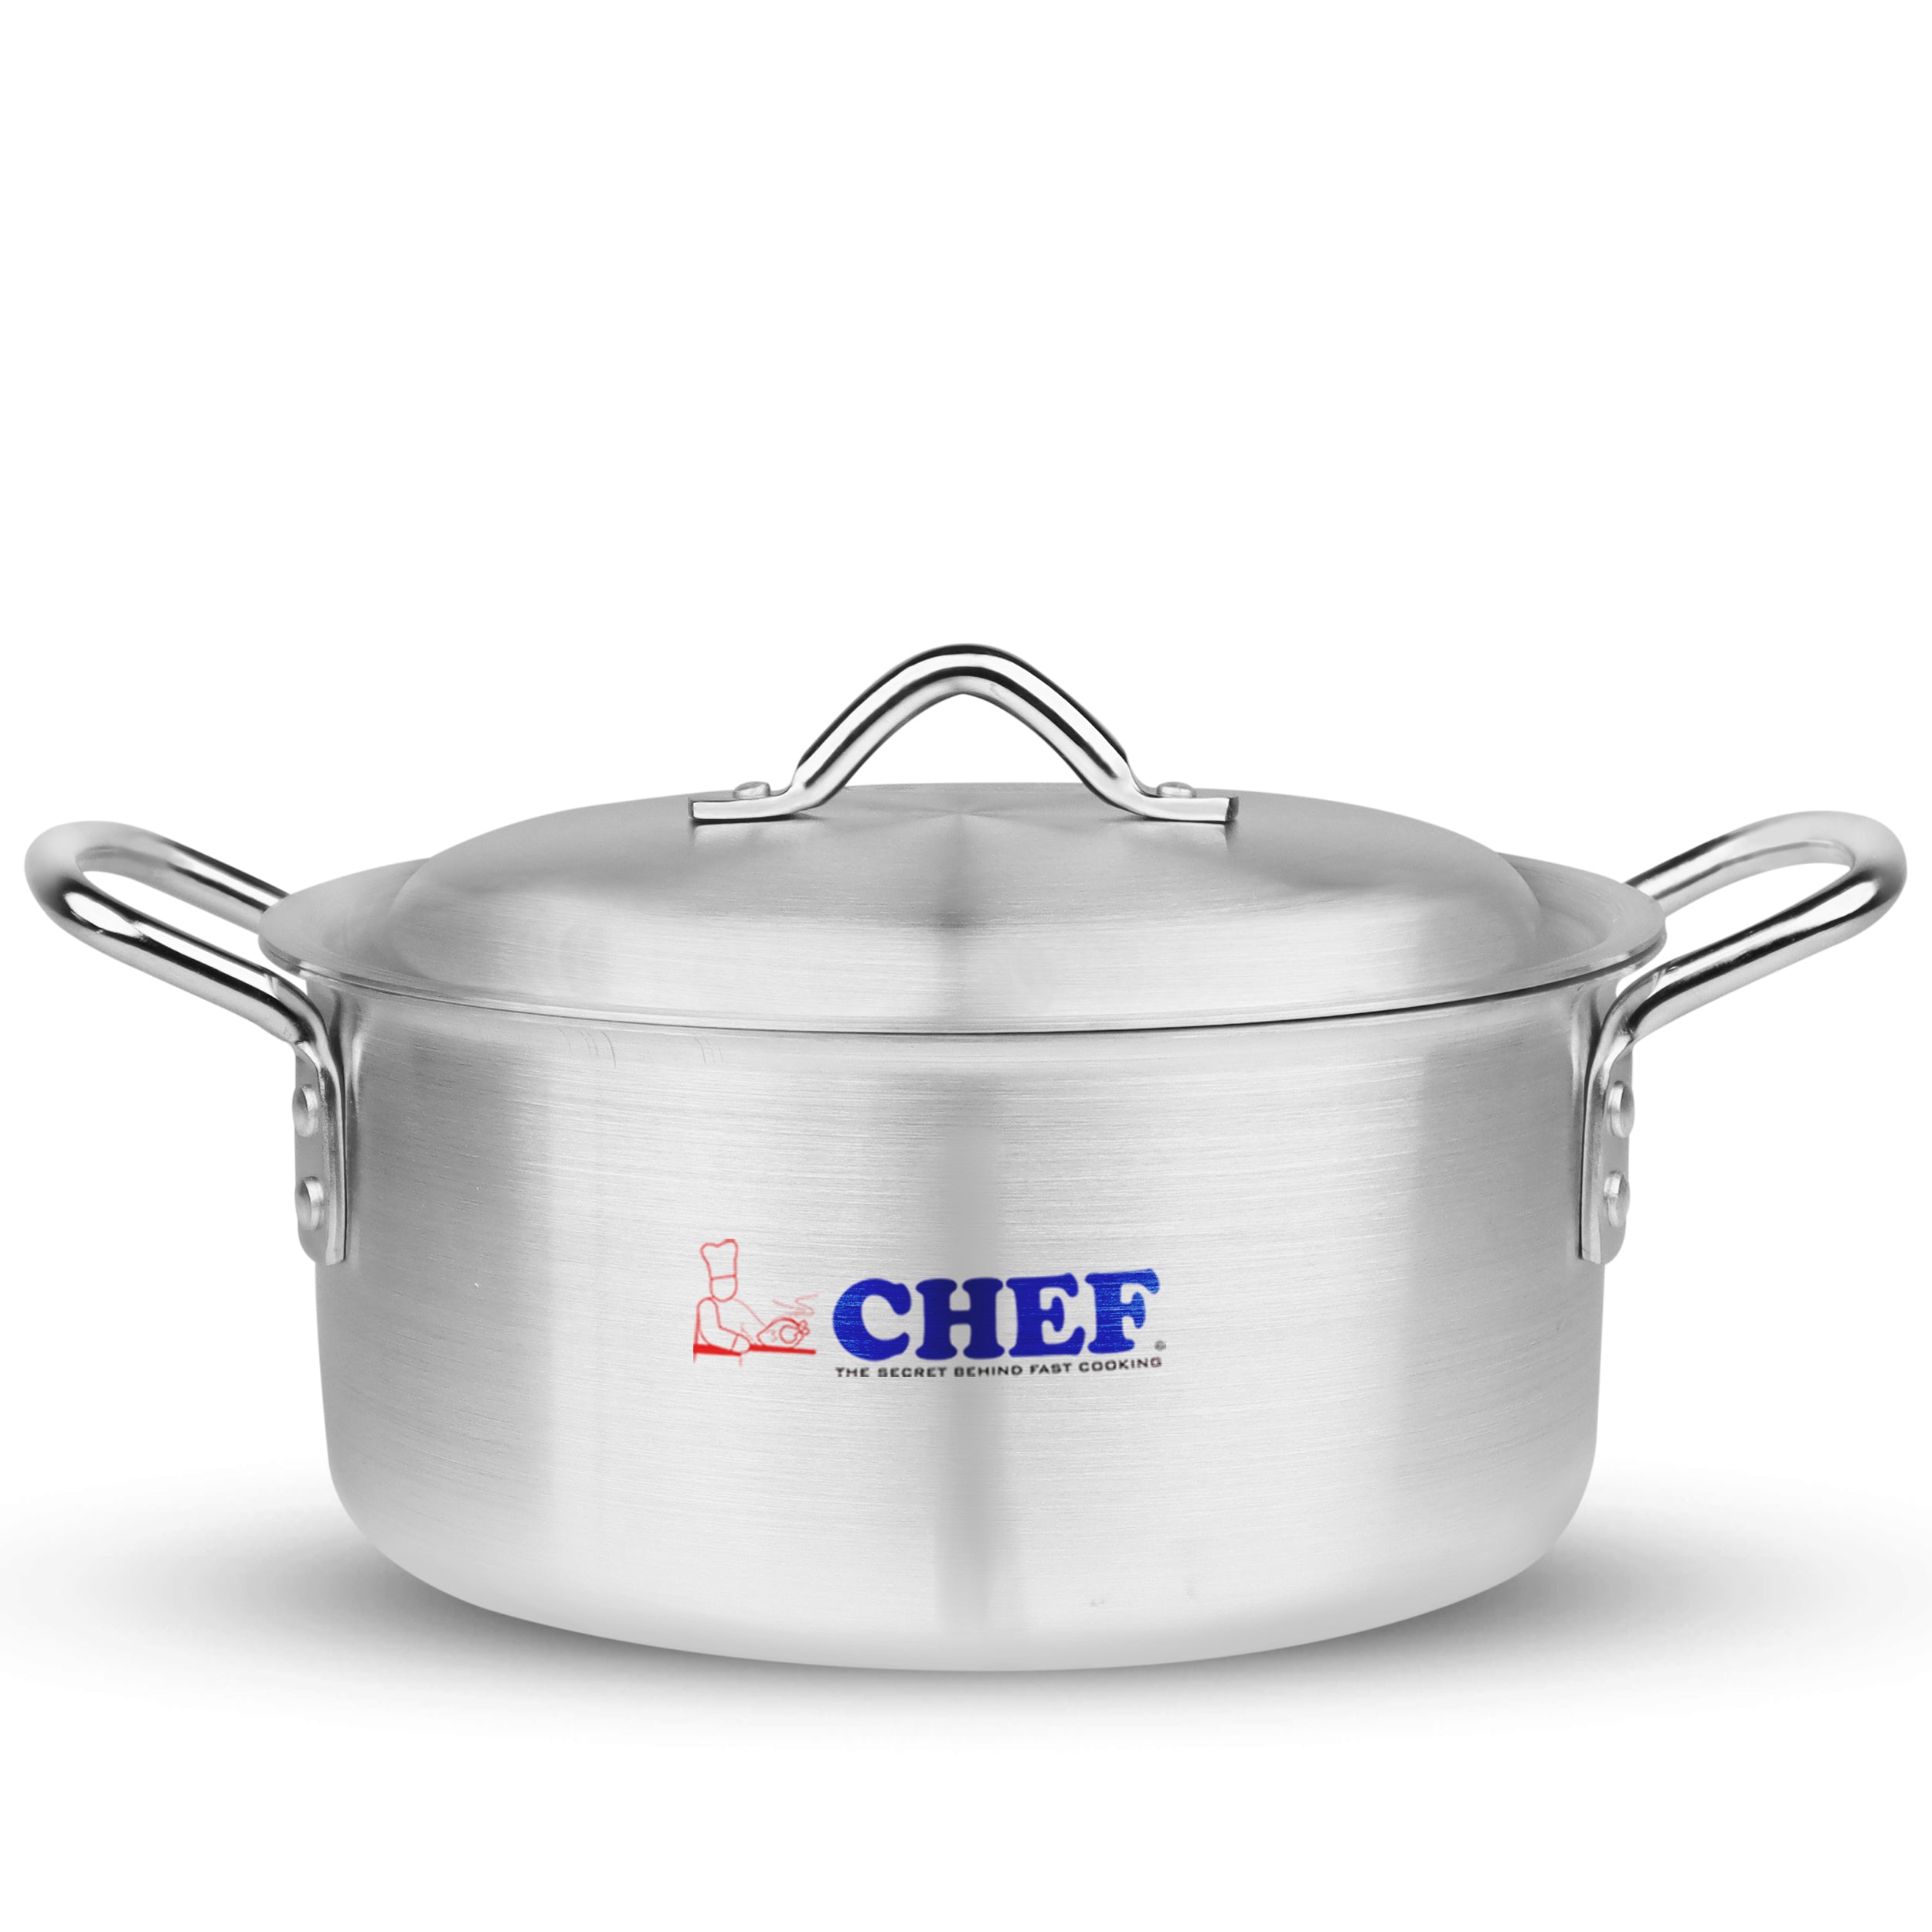 majestic chef best quality aluminum alloy metal 4 pcs casserole set / cooking pot set with silver lid at best price in Pakistan